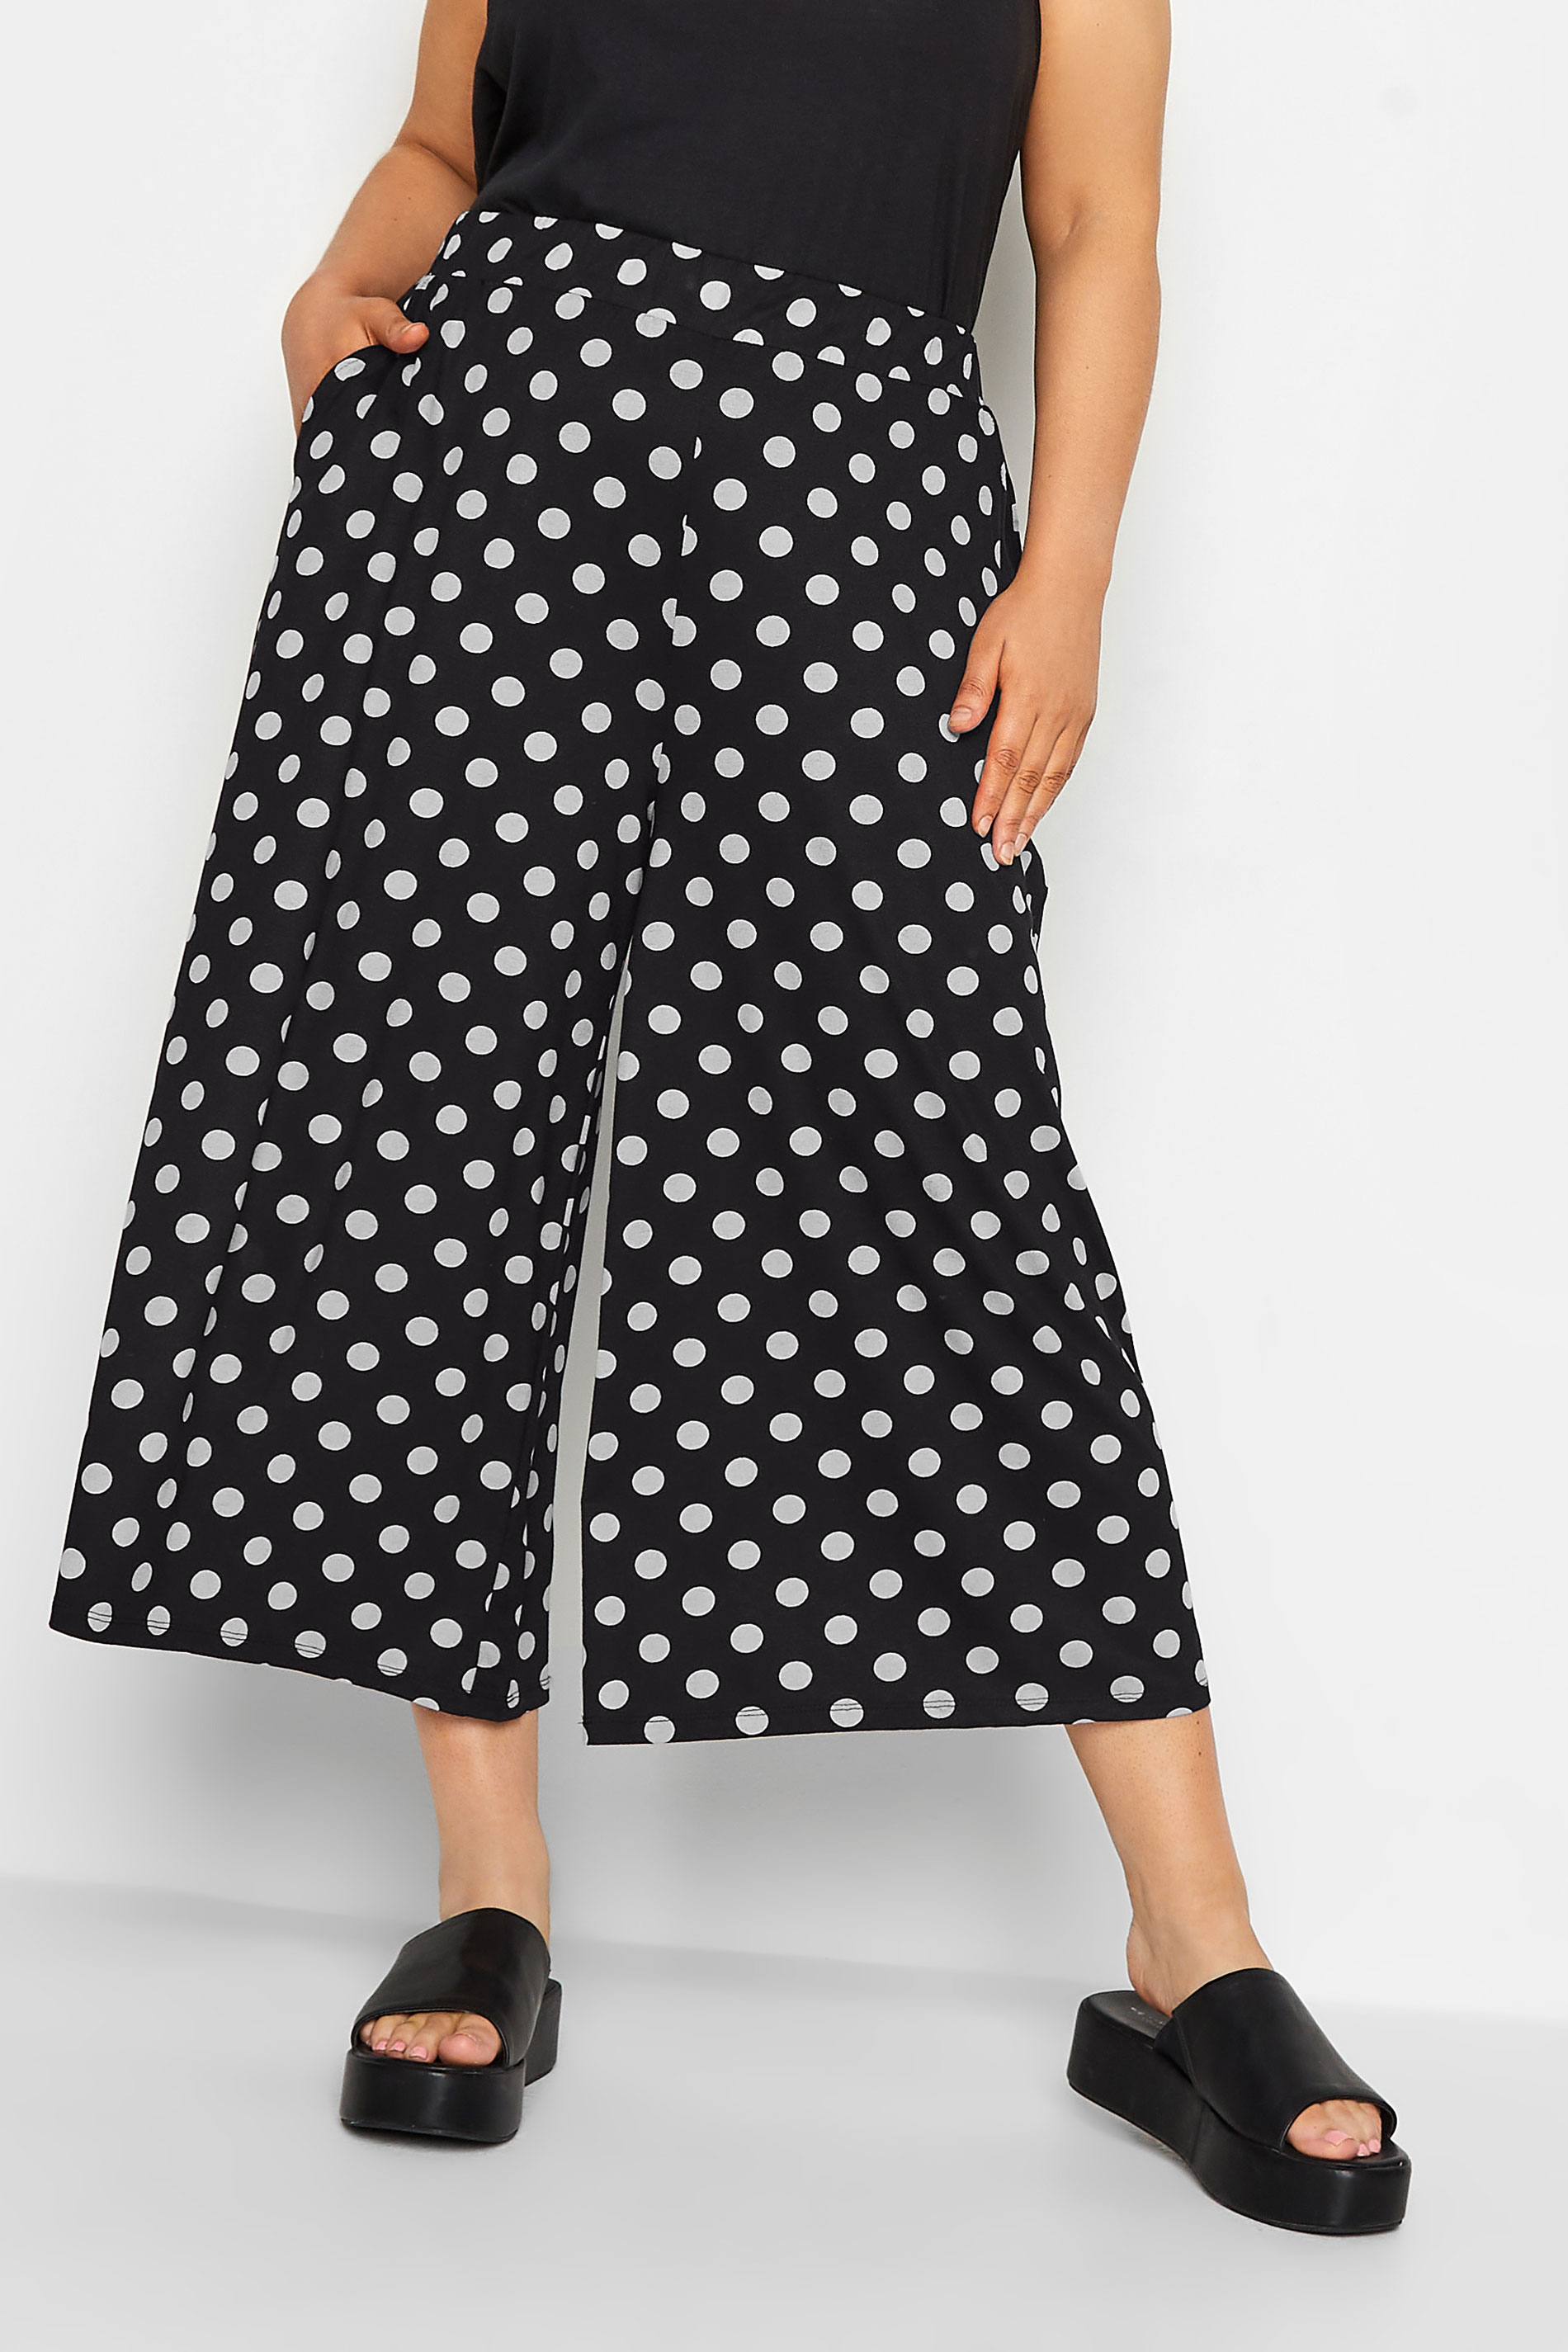 YOURS Plus Size Black Polka Dot Midaxi Culotte | Yours Clothing 1